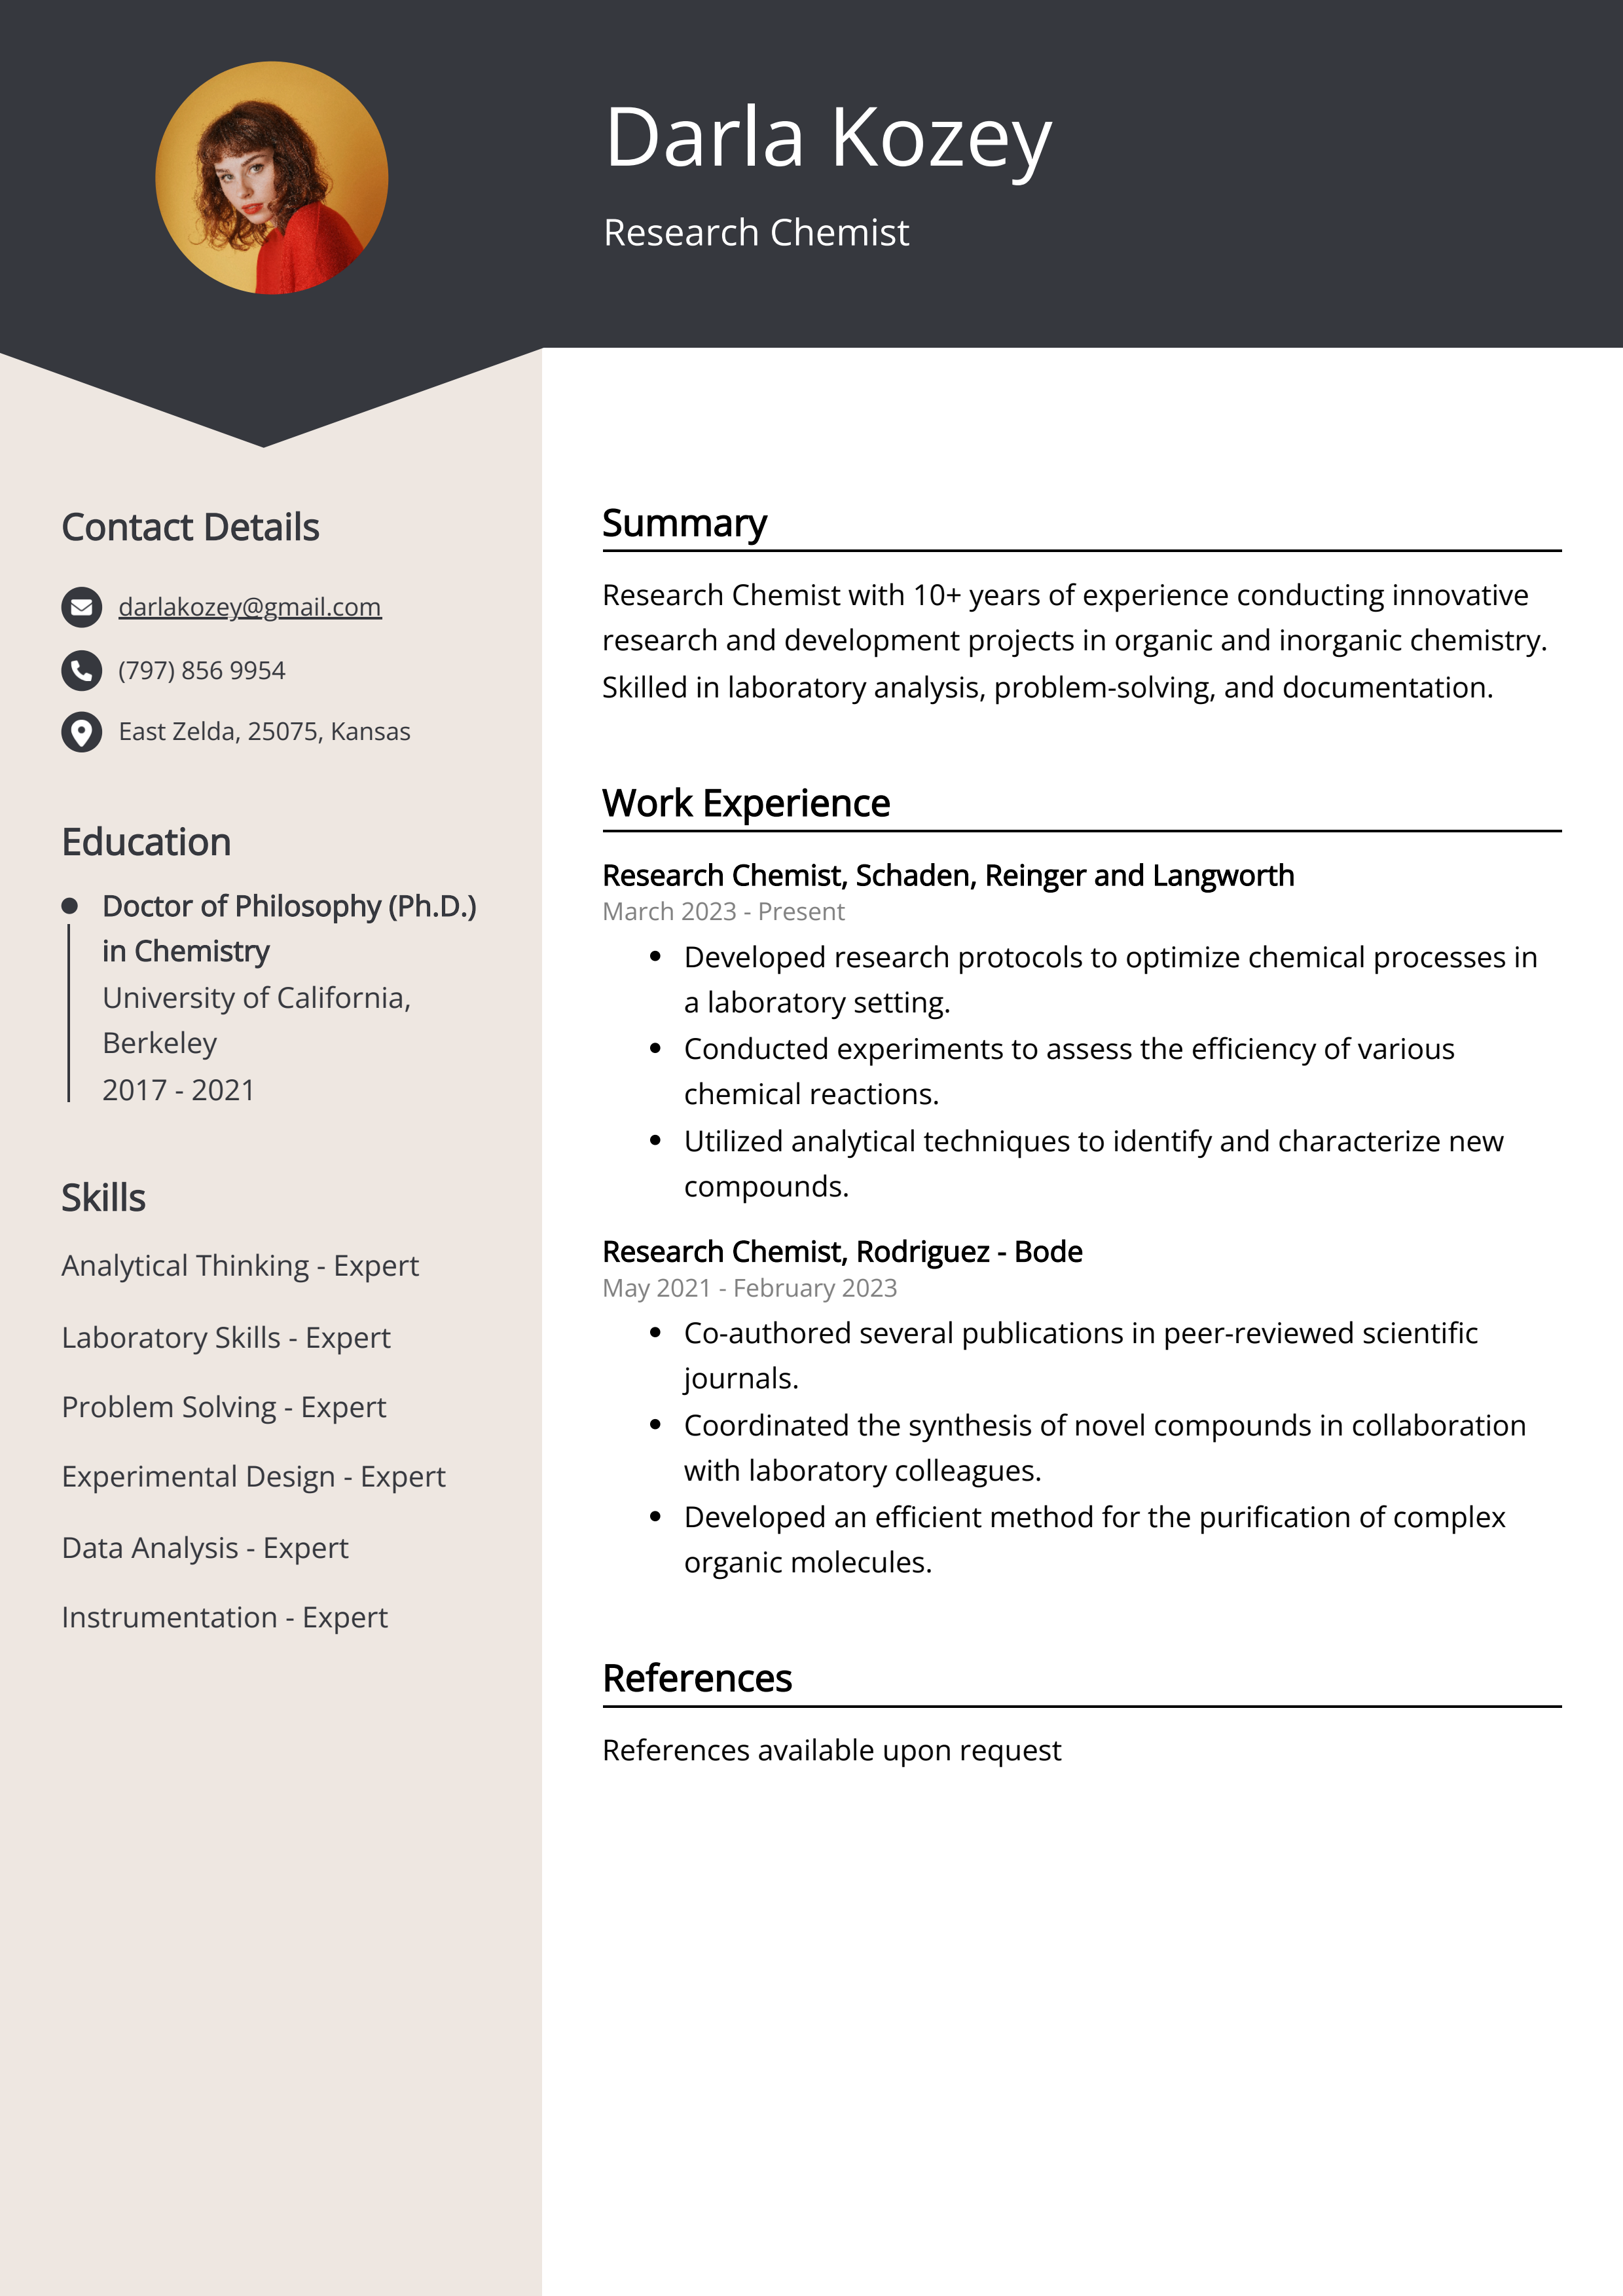 Research Chemist CV Example